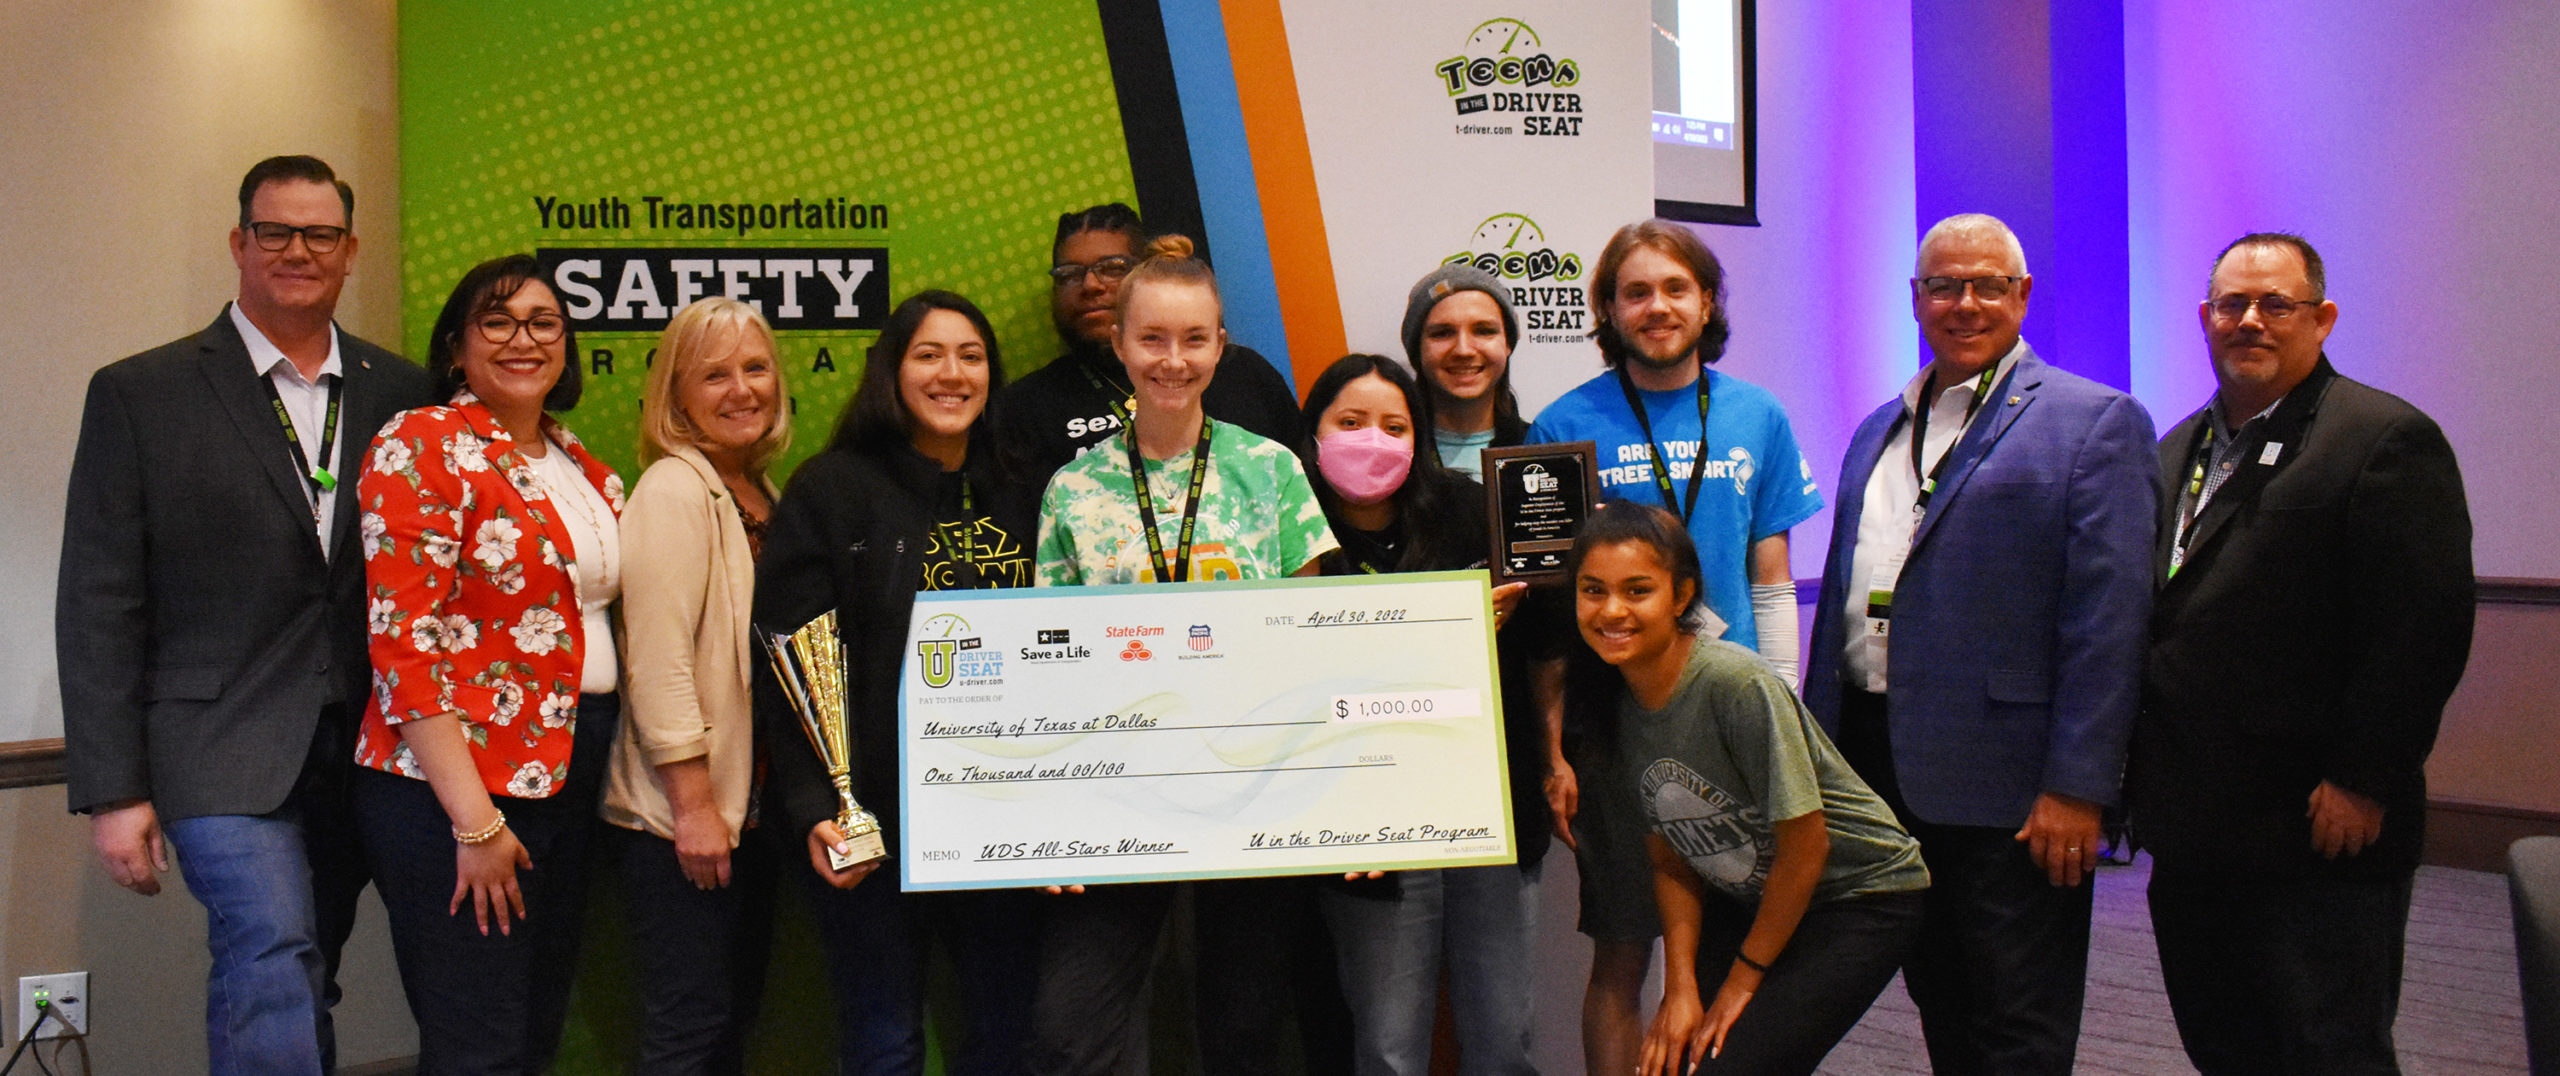 Group from The University of Texas at Dallas holding an All-Star winner check in front of a Youth Transportation Safety Program sign.